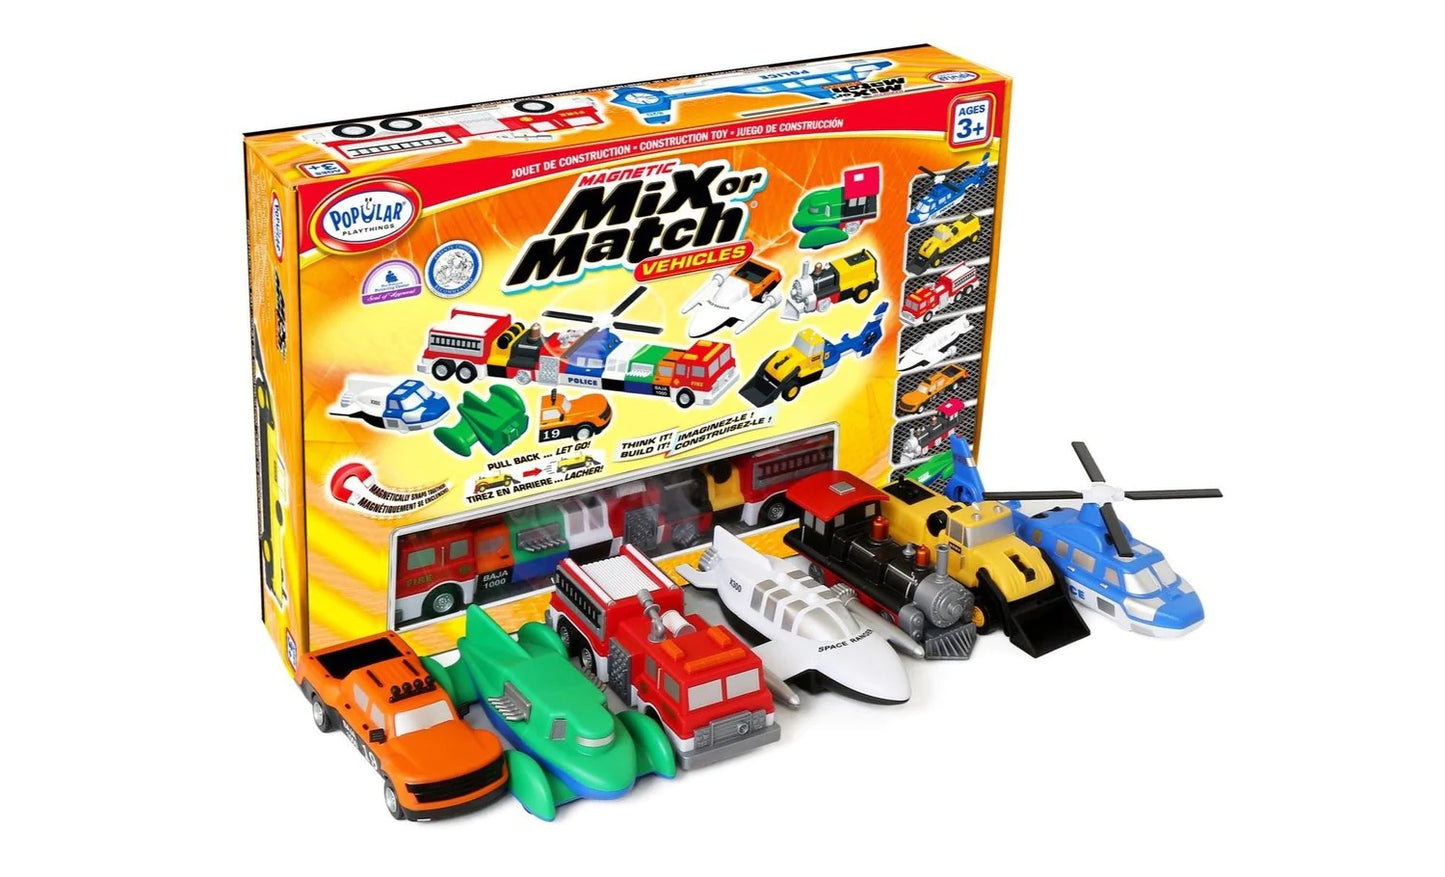 Micro Mix or Match Vehicle Deluxe 2